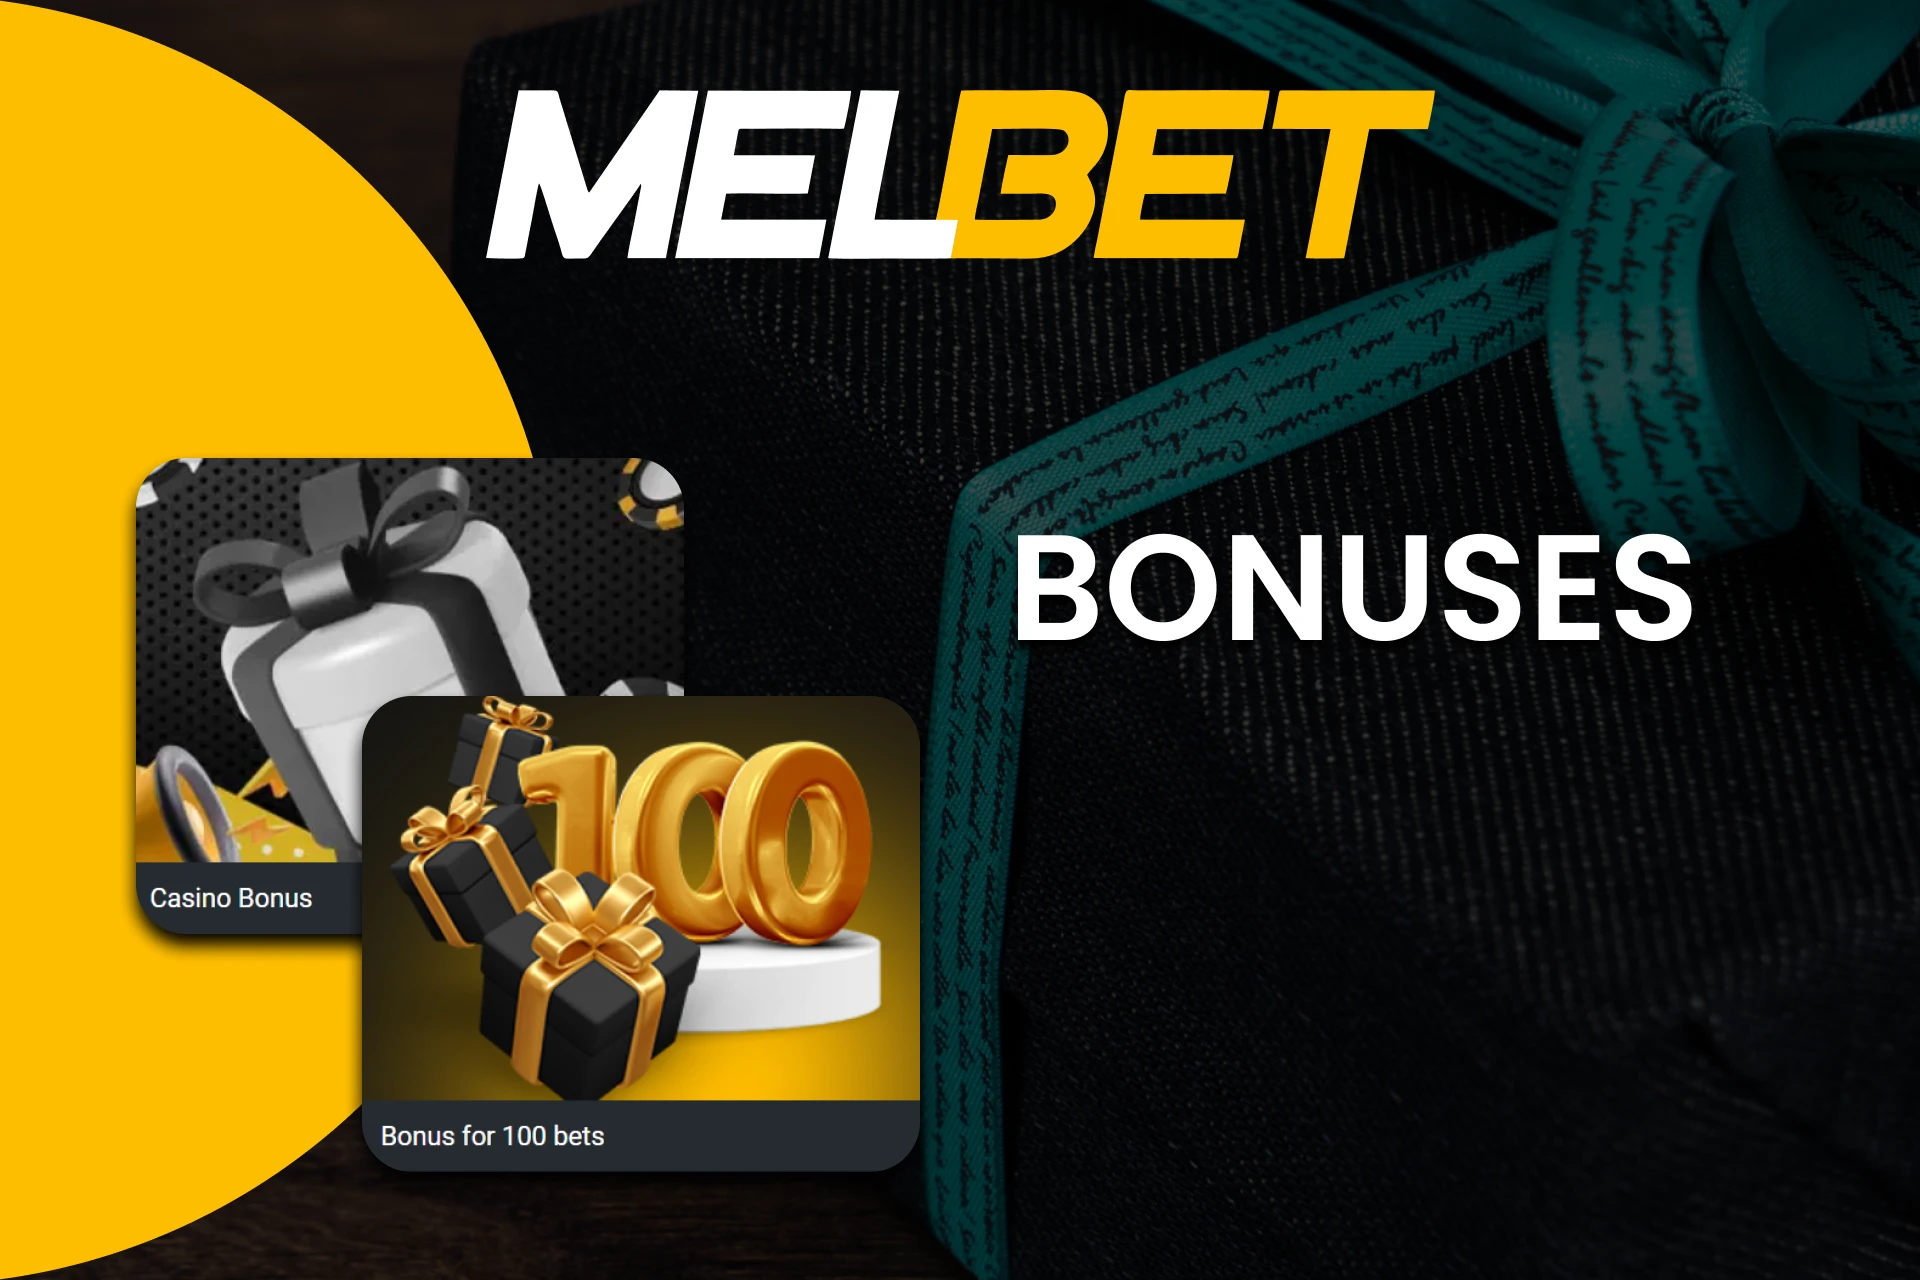 Melbet gives bonuses for games to all users.